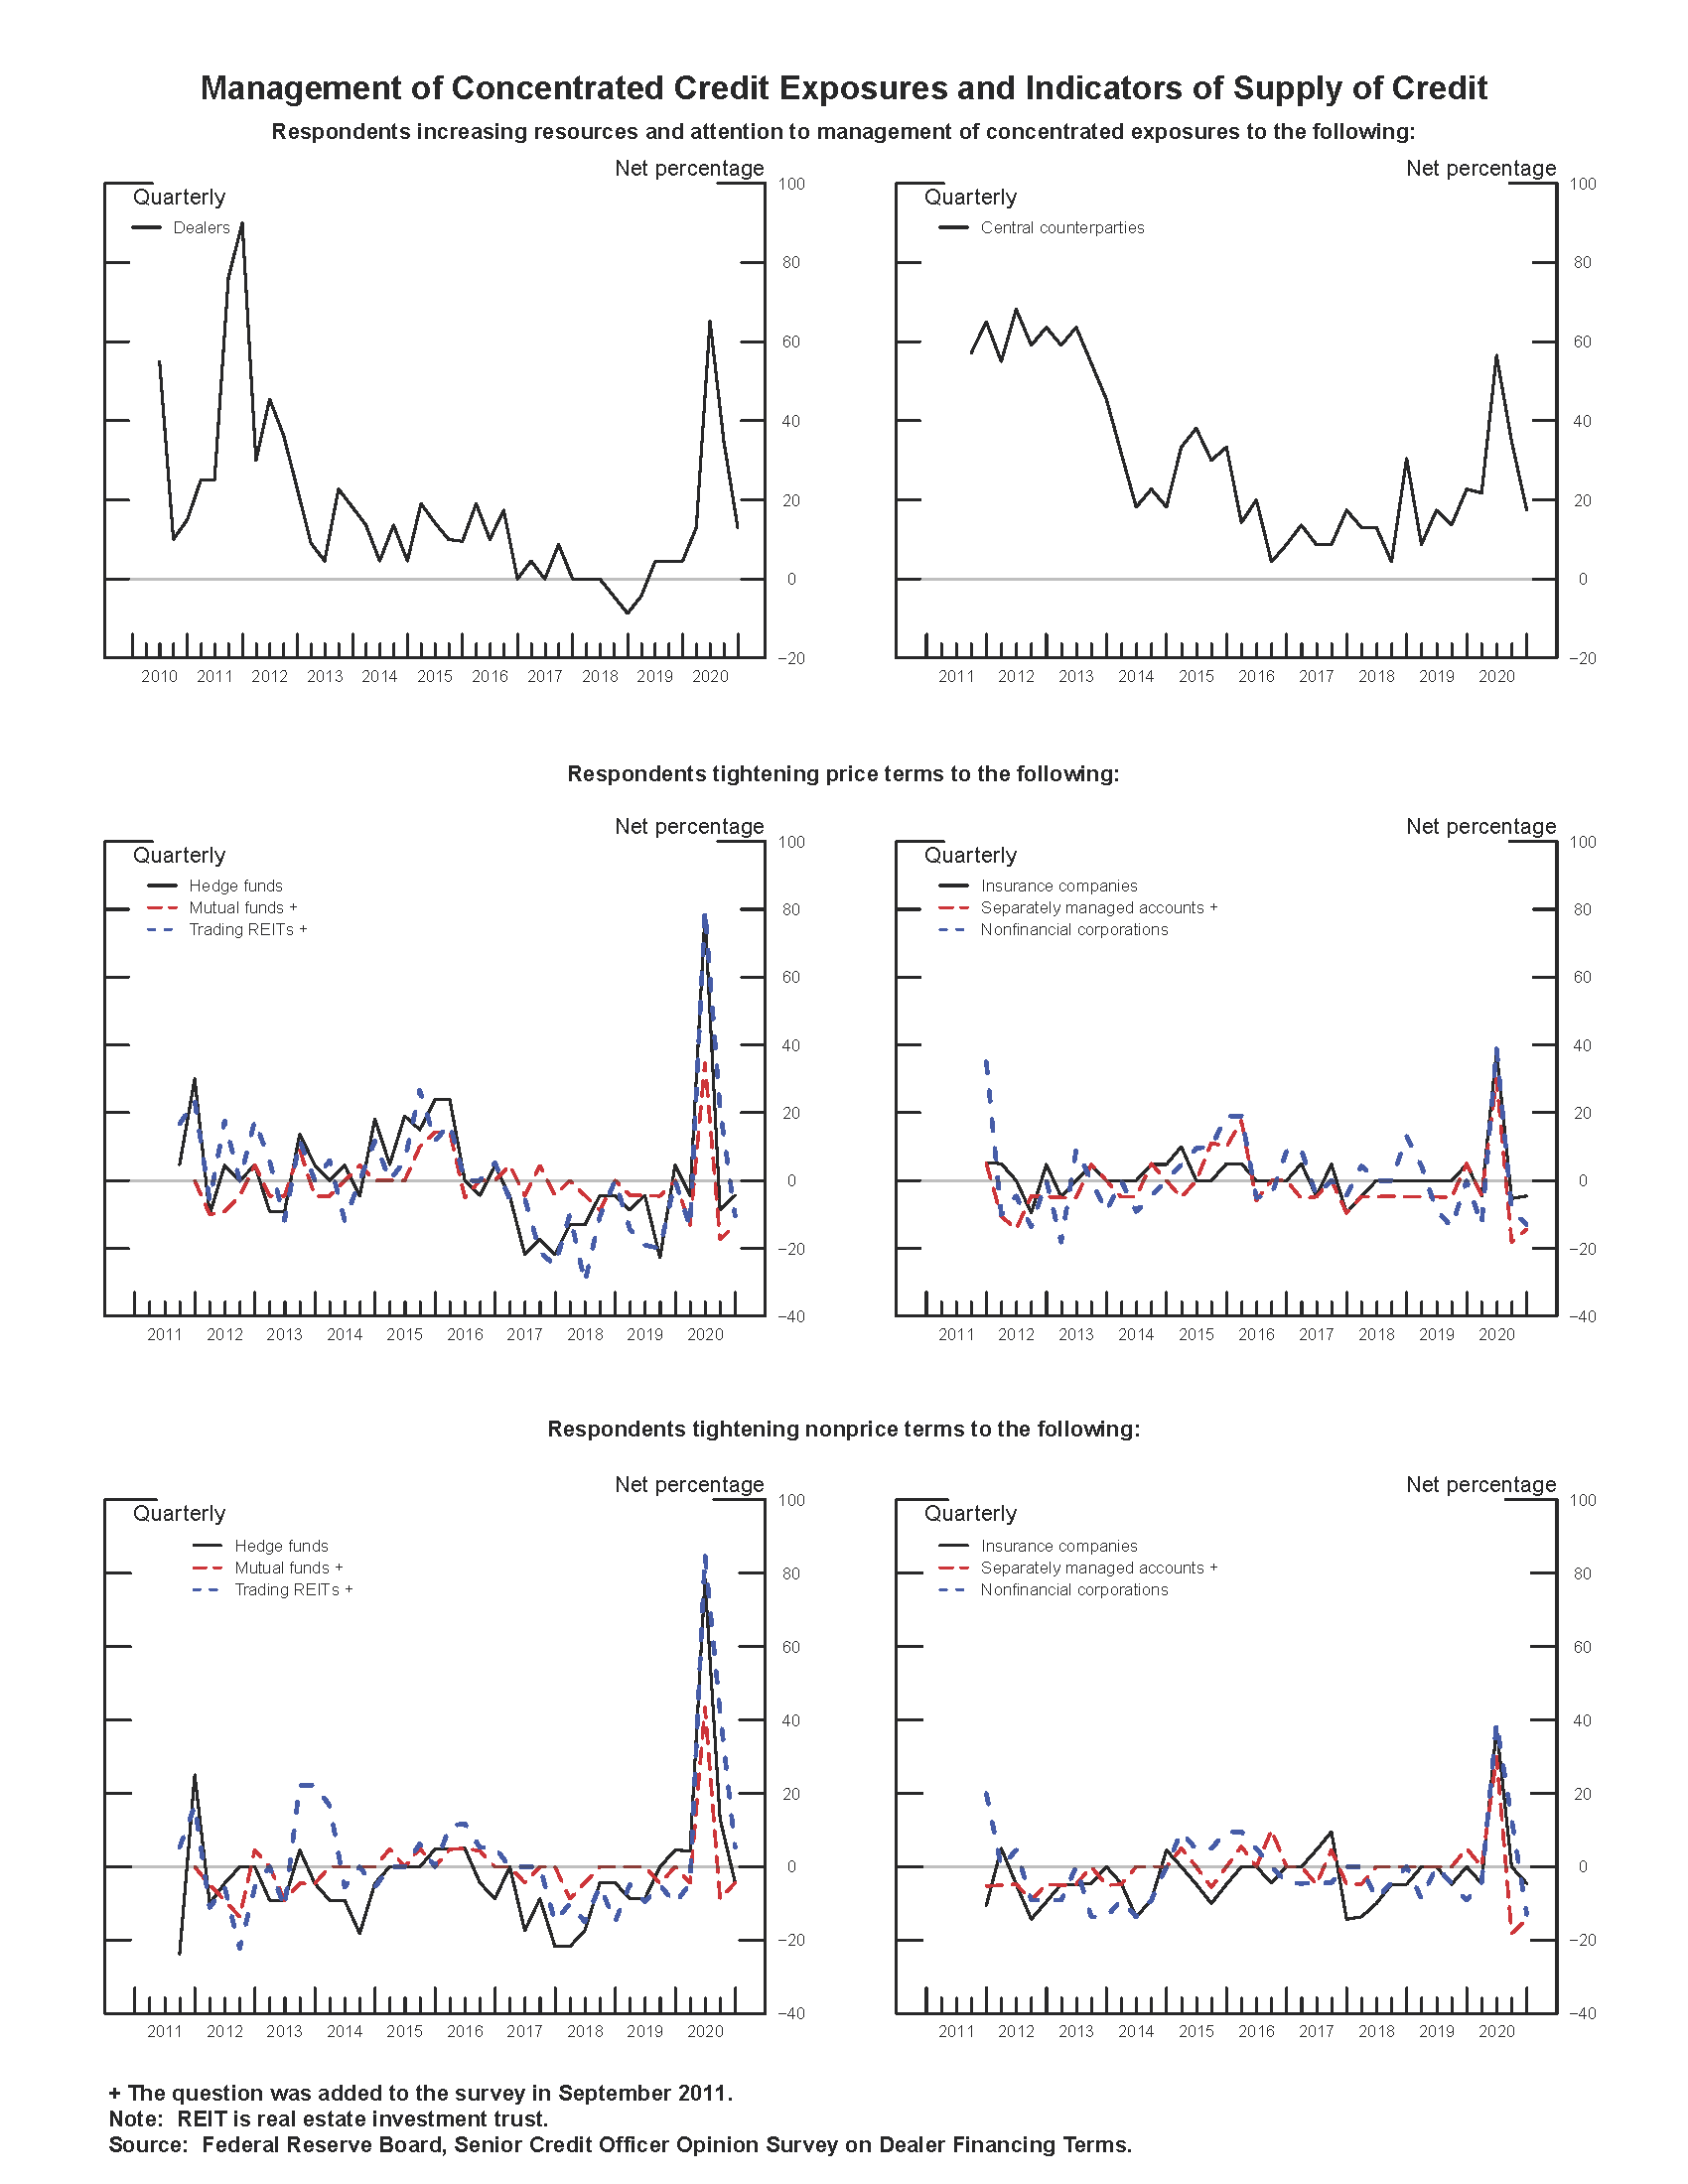 Exhibit 1: Management of Concentrated Credit Exposures and Indicators of Supply of Credit. See accessible link for data.